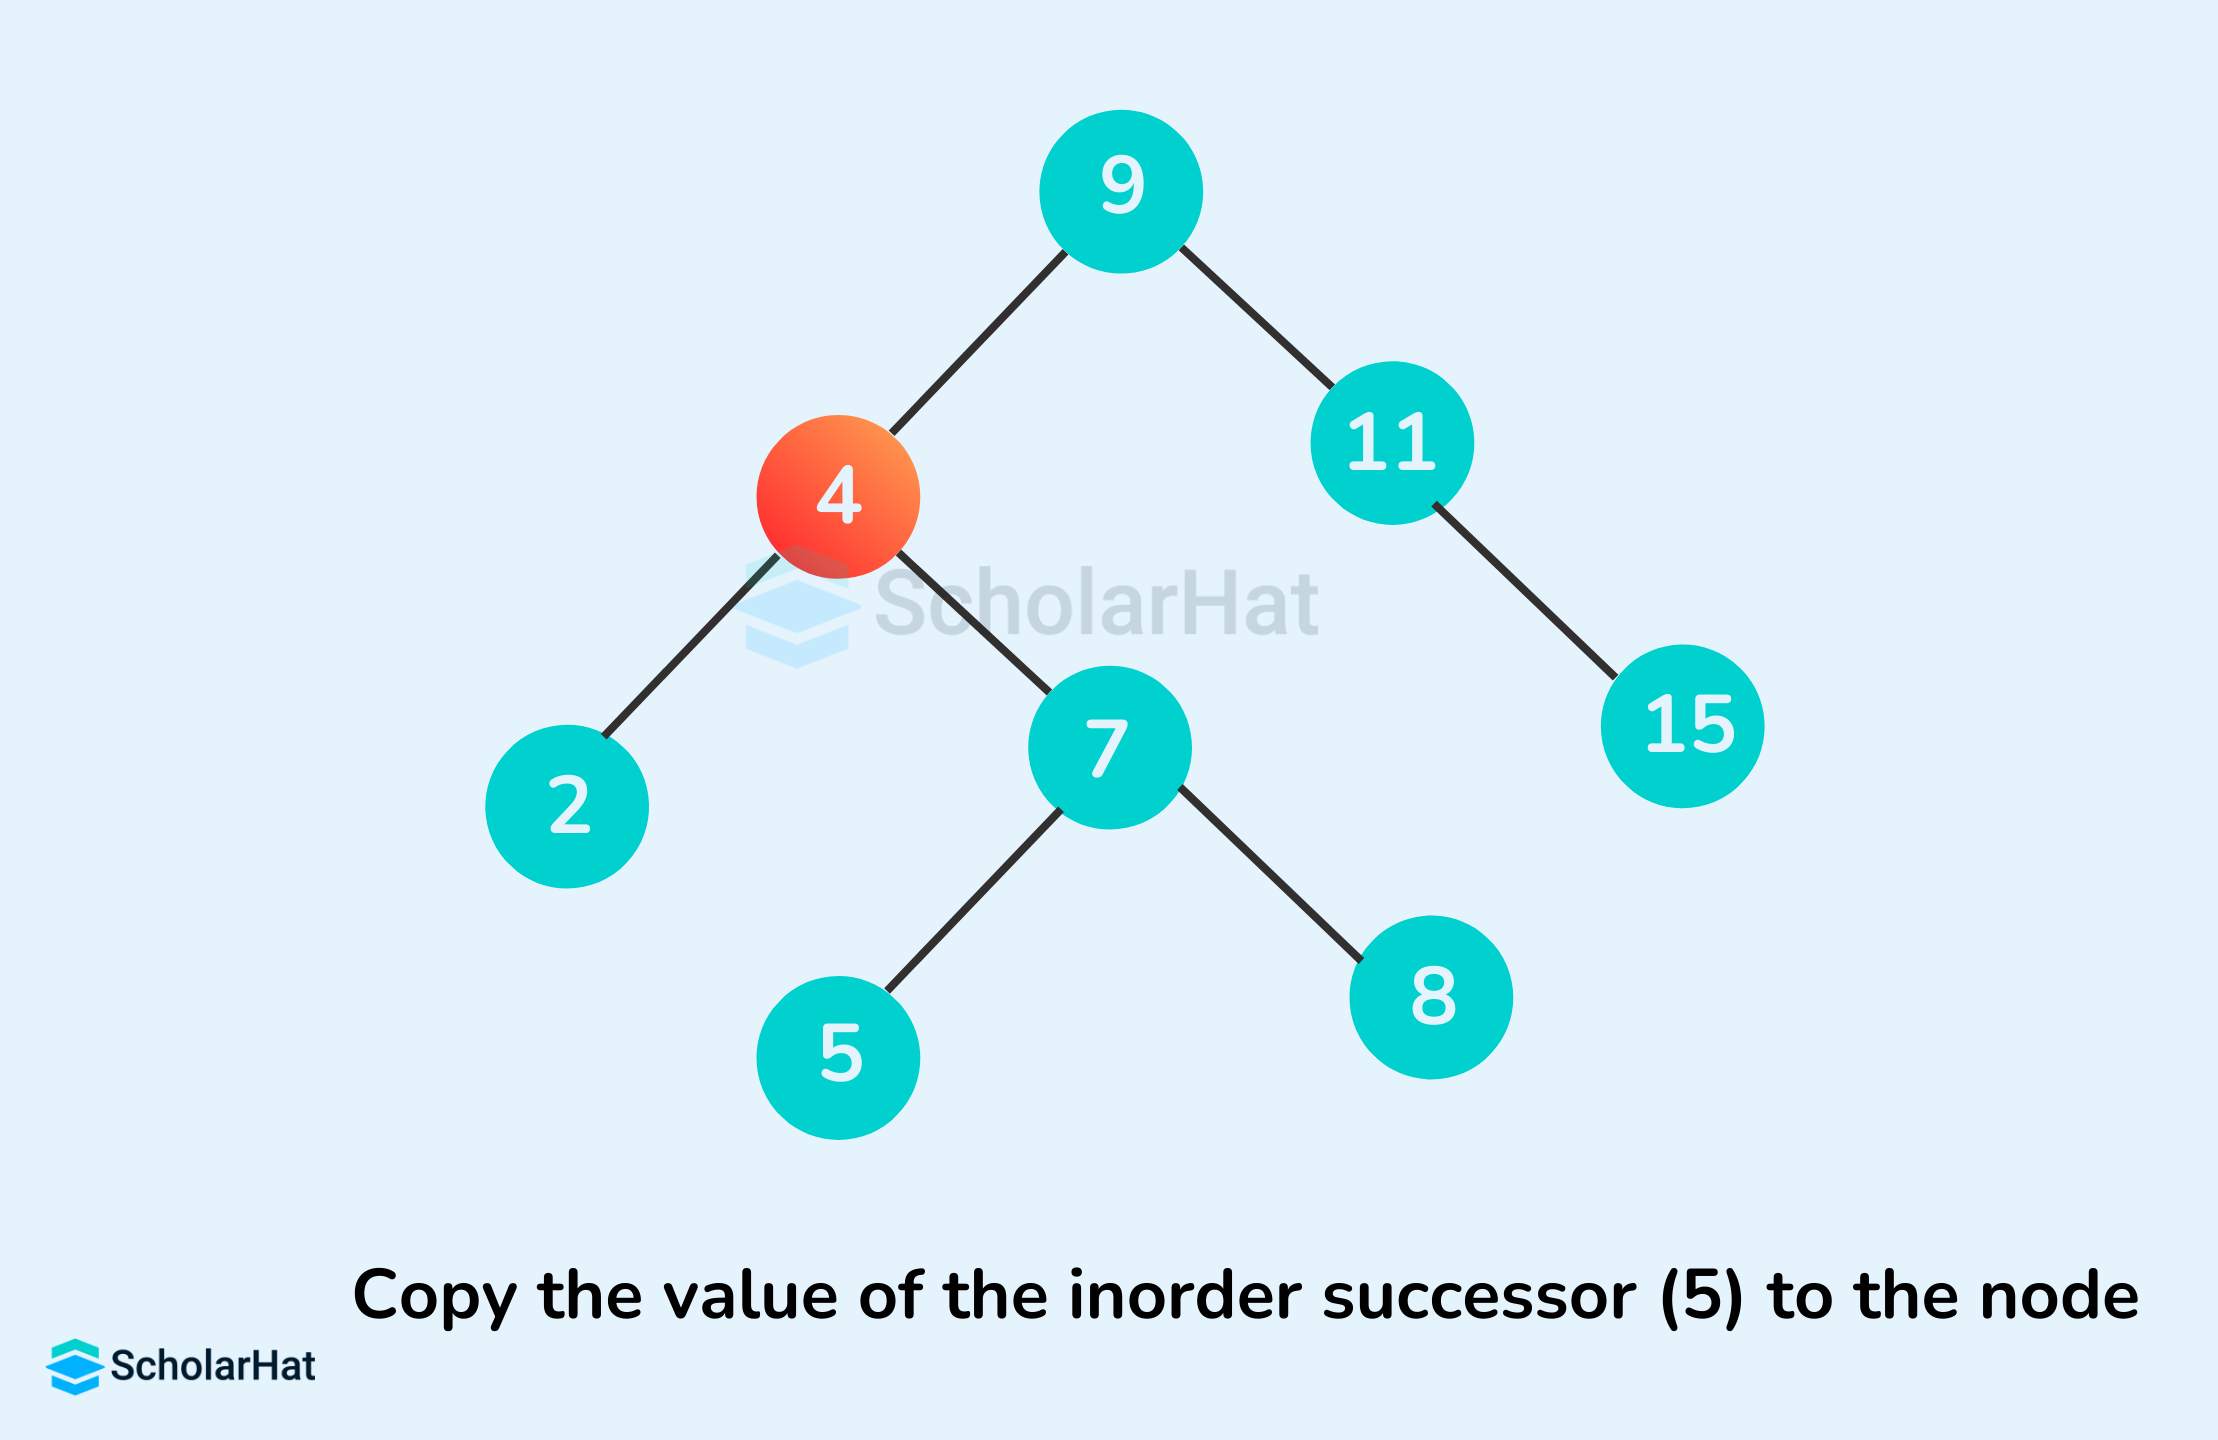 Copy the value of the inorder successor (5) to the node